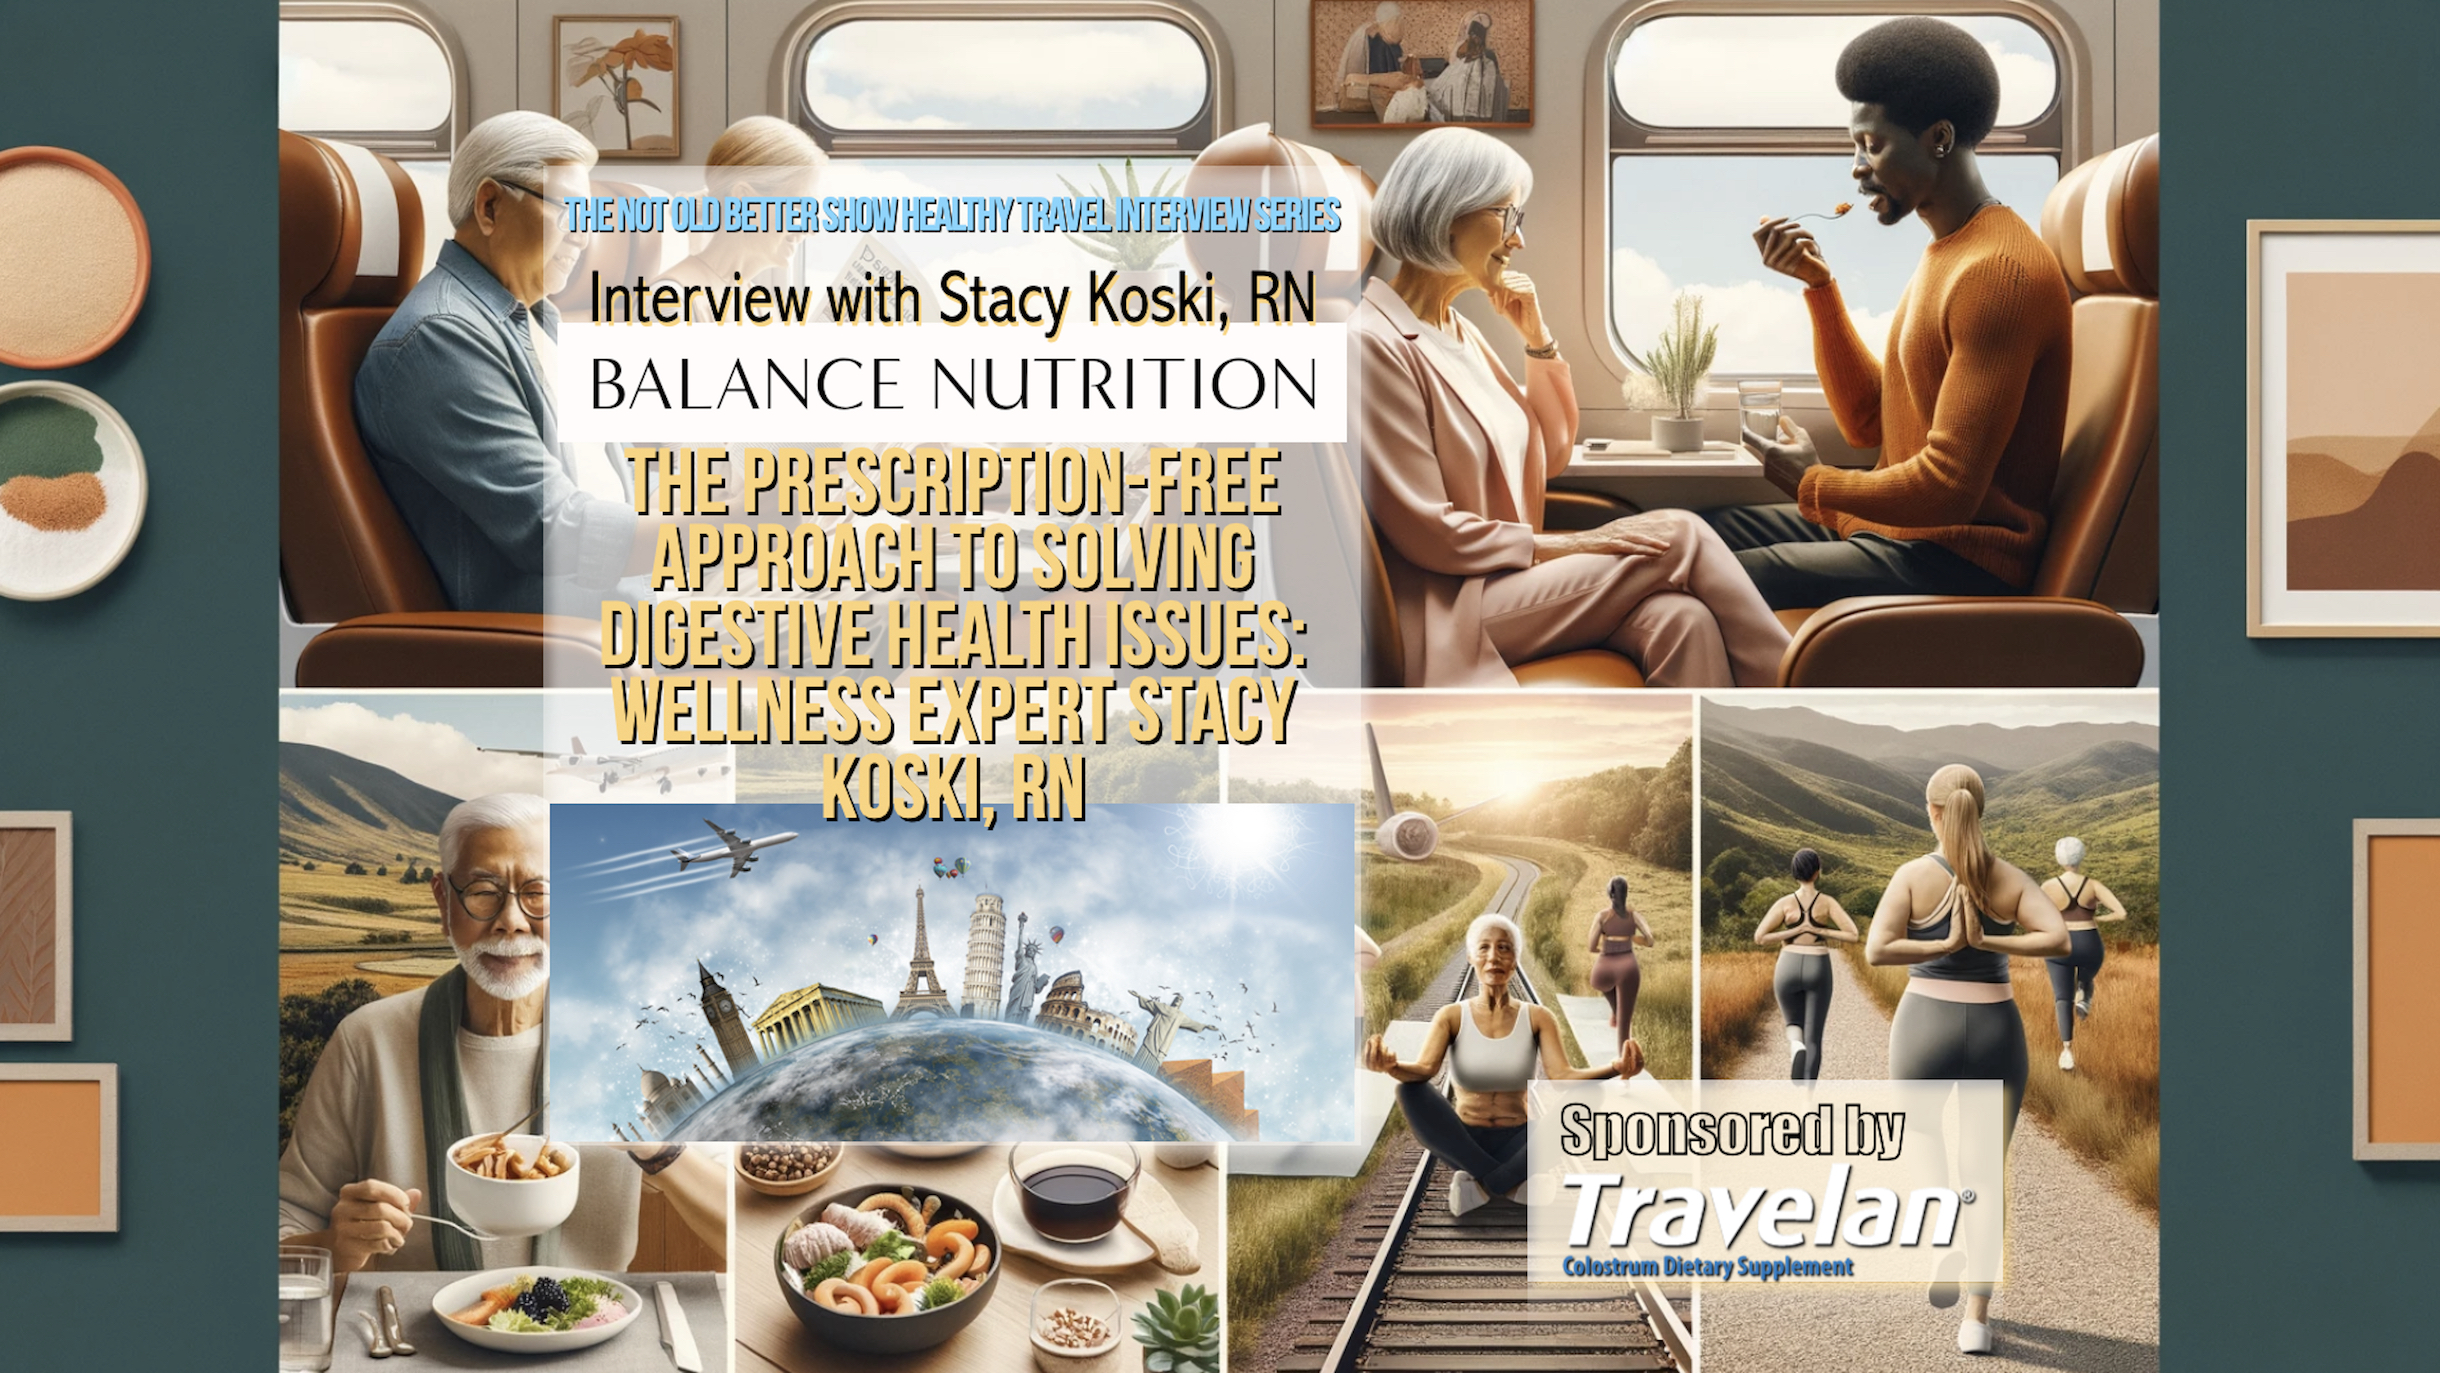 The Prescription-Free Approach to Solving Digestive Health Issues: Wellness Expert Stacy Koski, RN, Explains